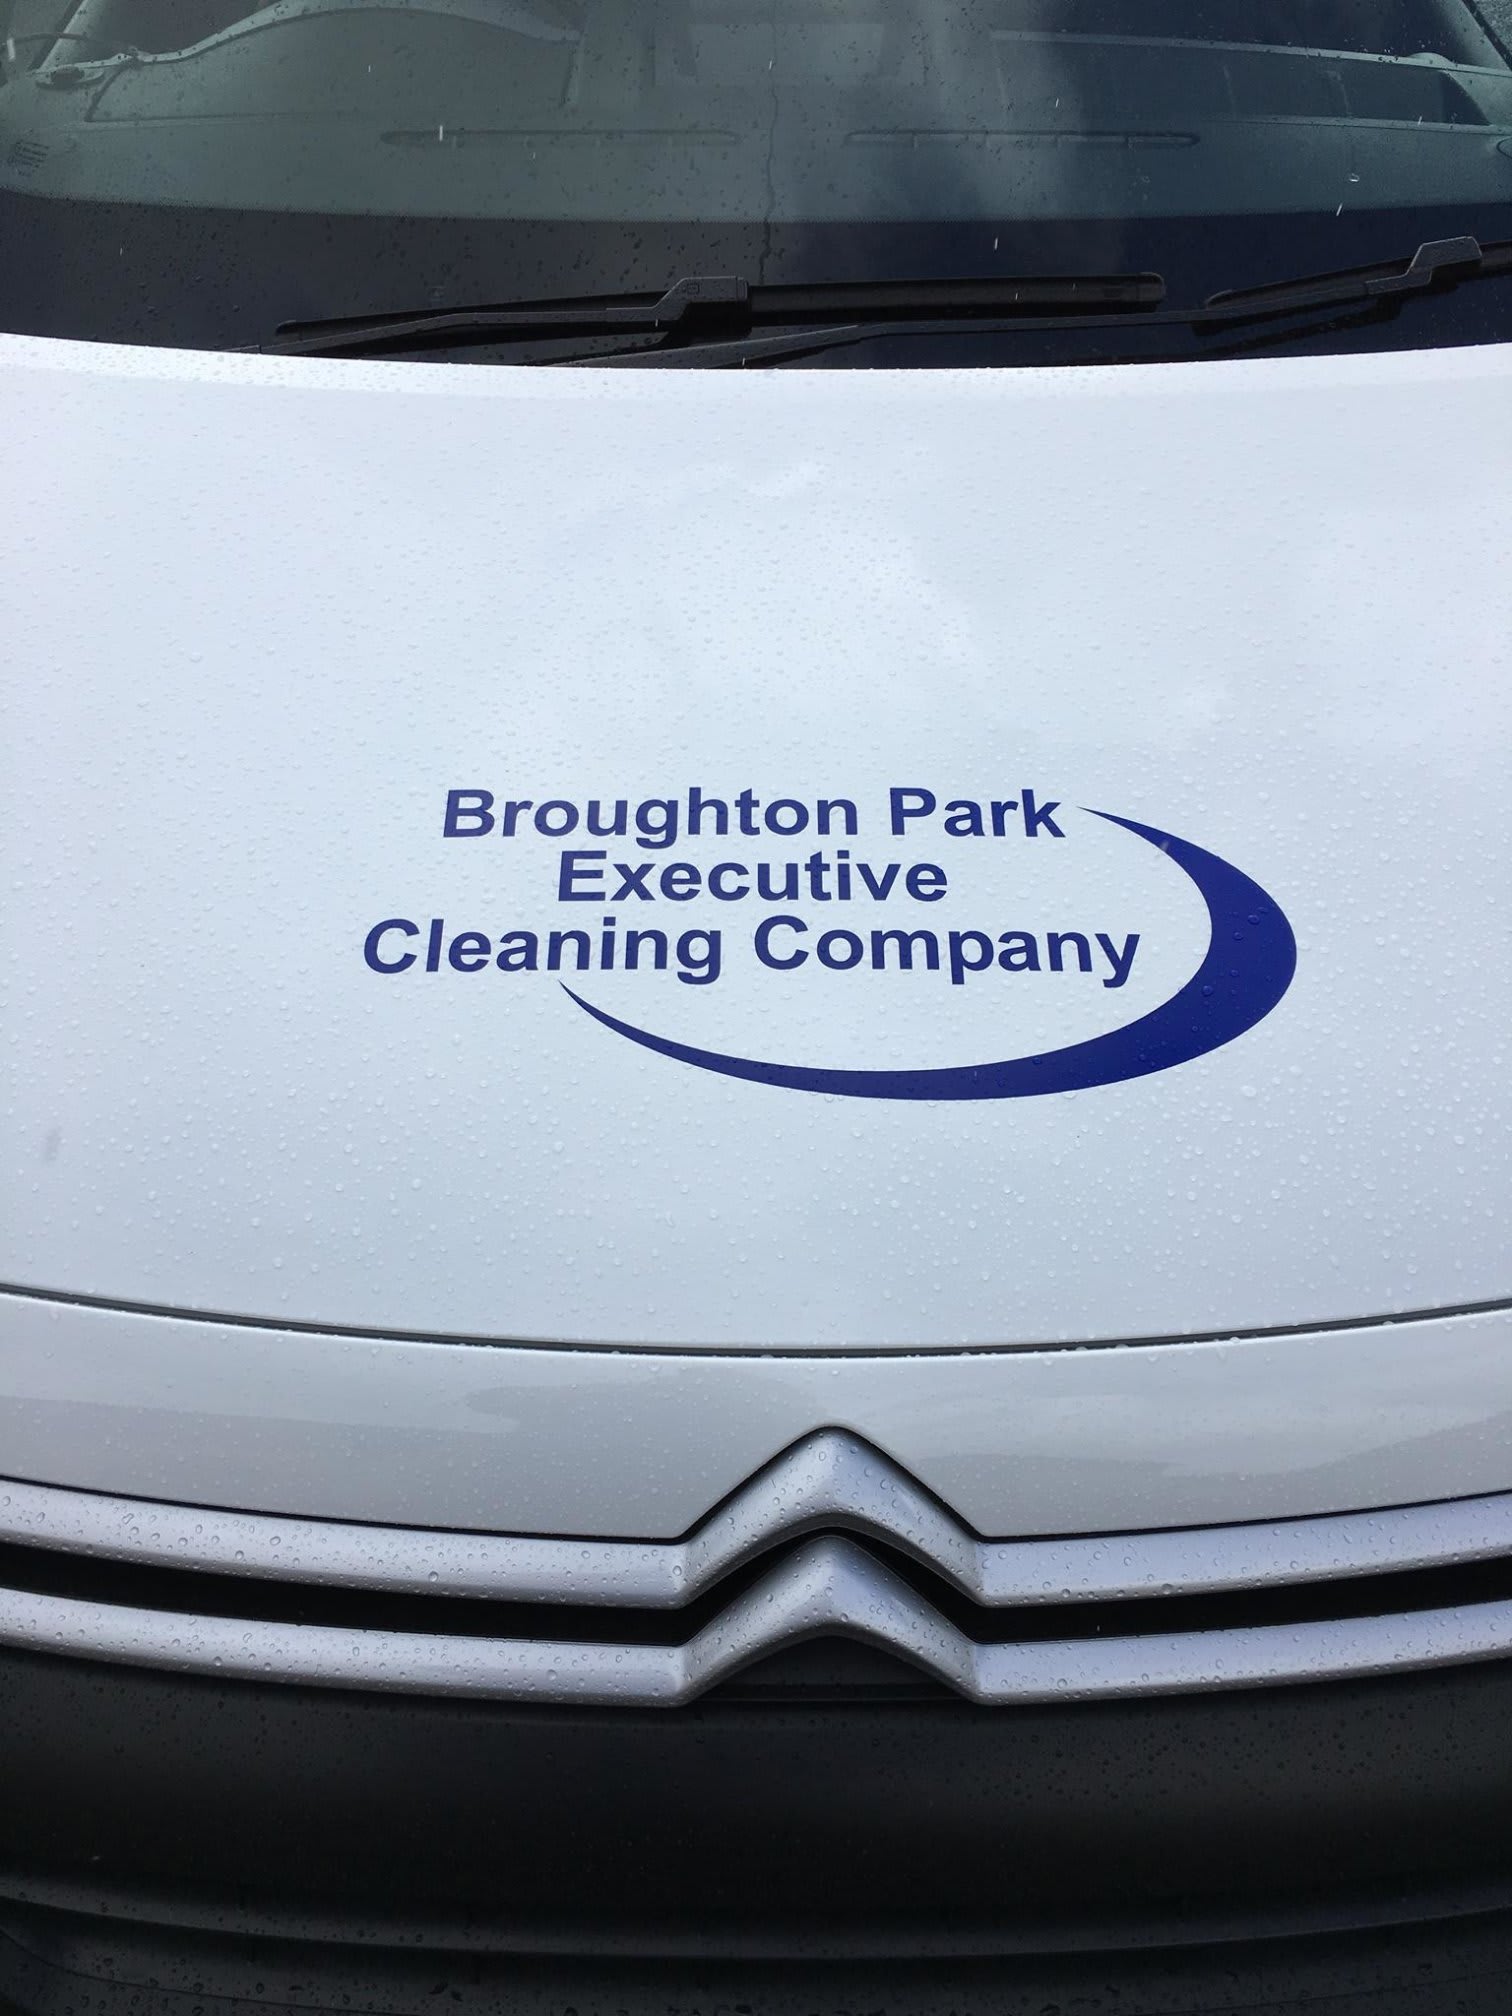 Broughton Park Executive Cleaning Company Keighley 01535 662672